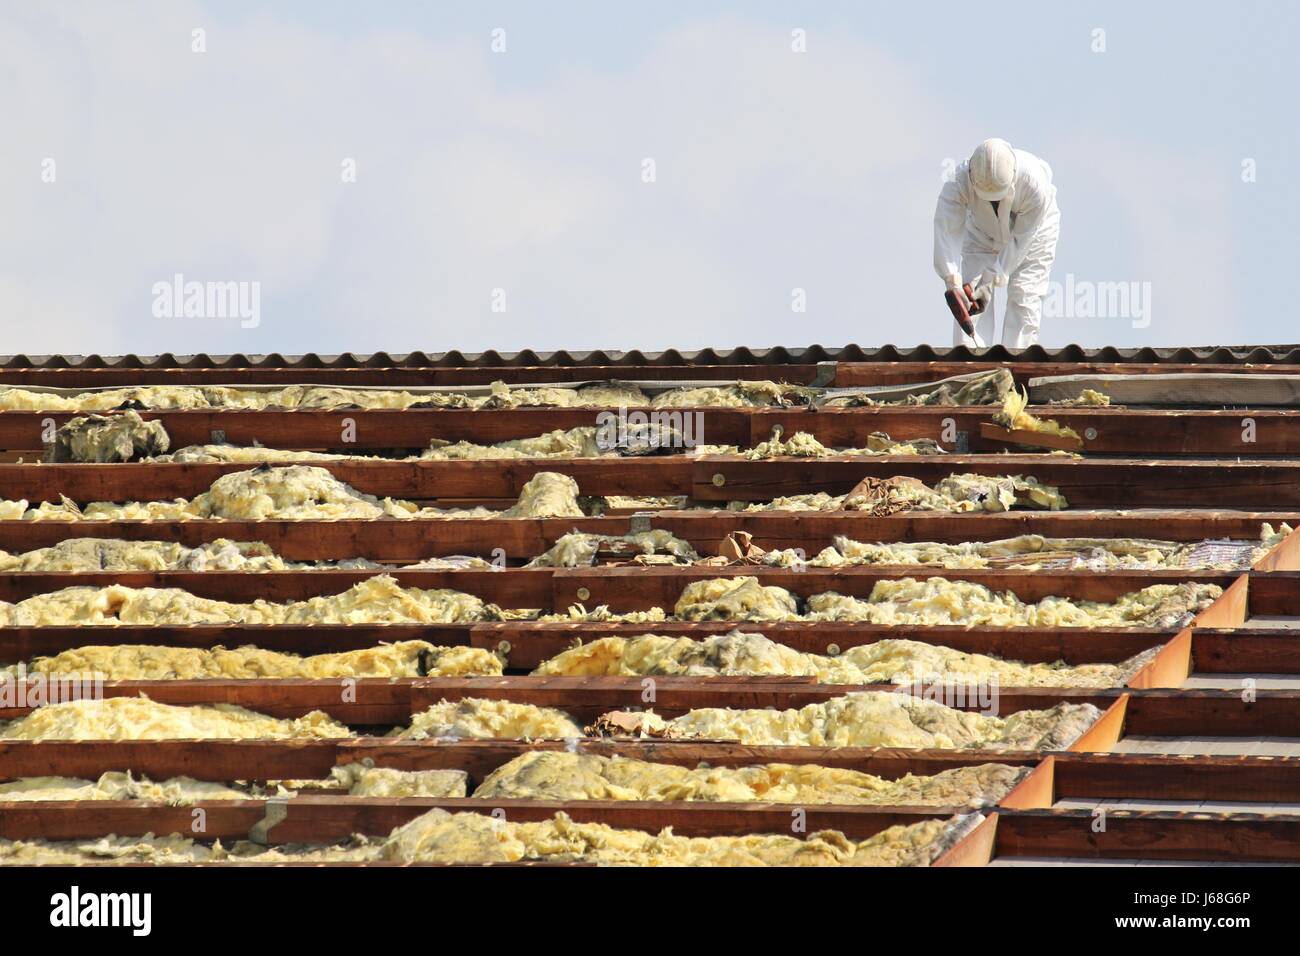 workman at rooftop of building being remediated Stock Photo